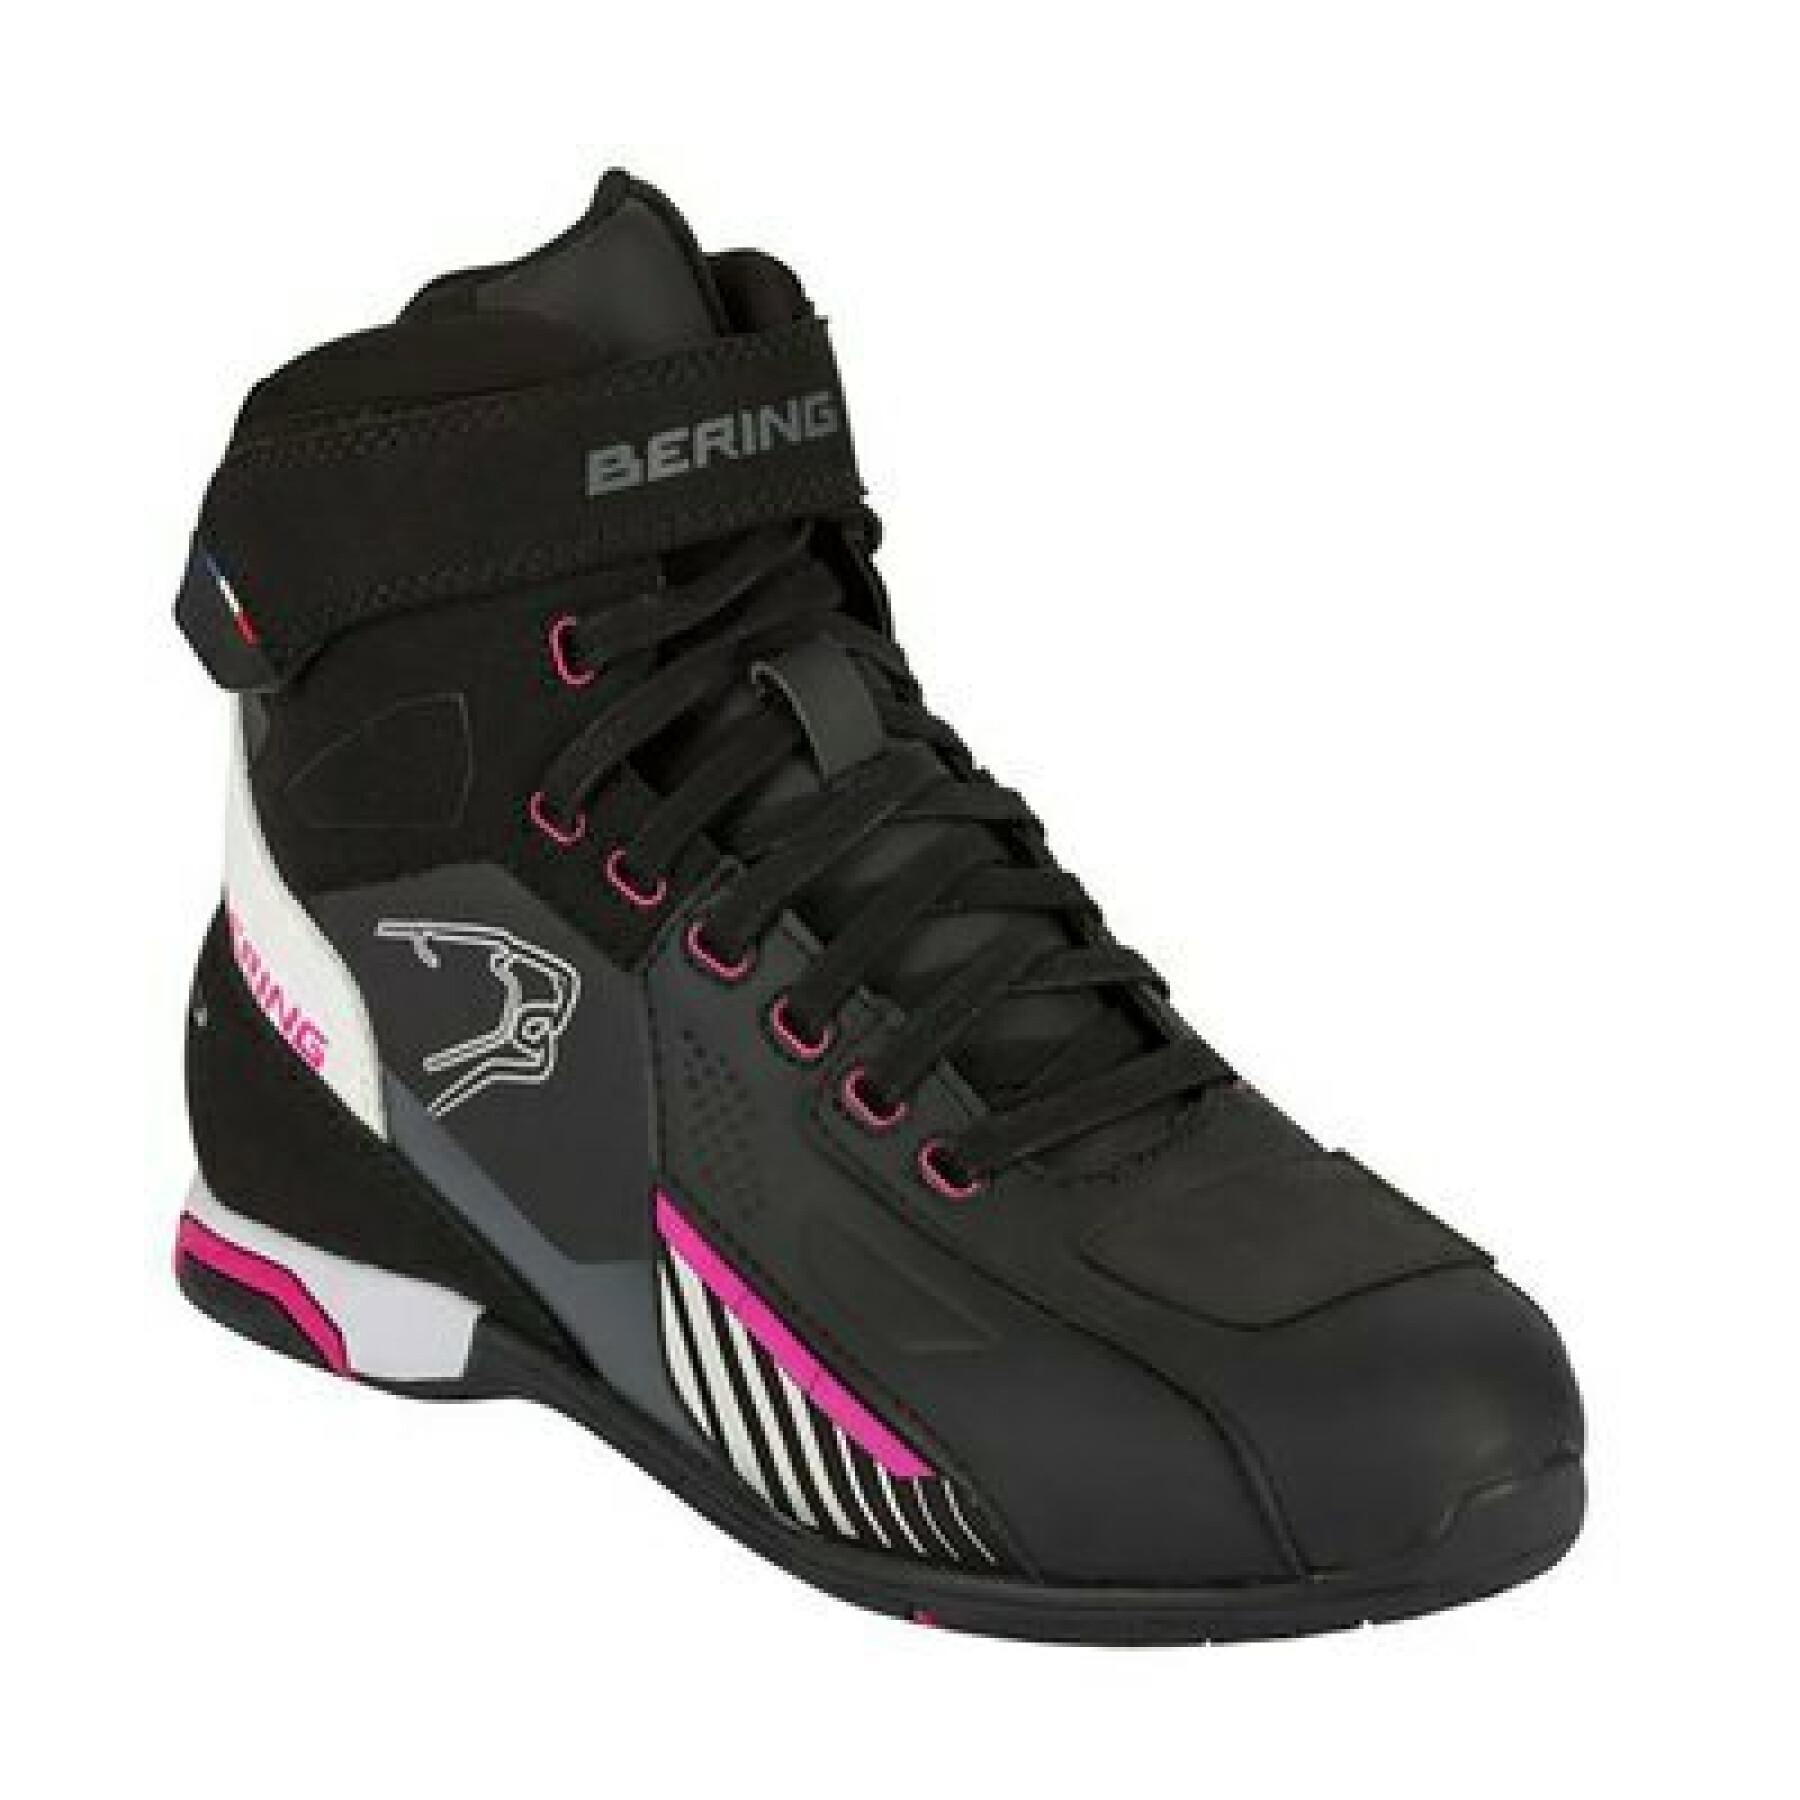 Women's shoes Bering Tiger